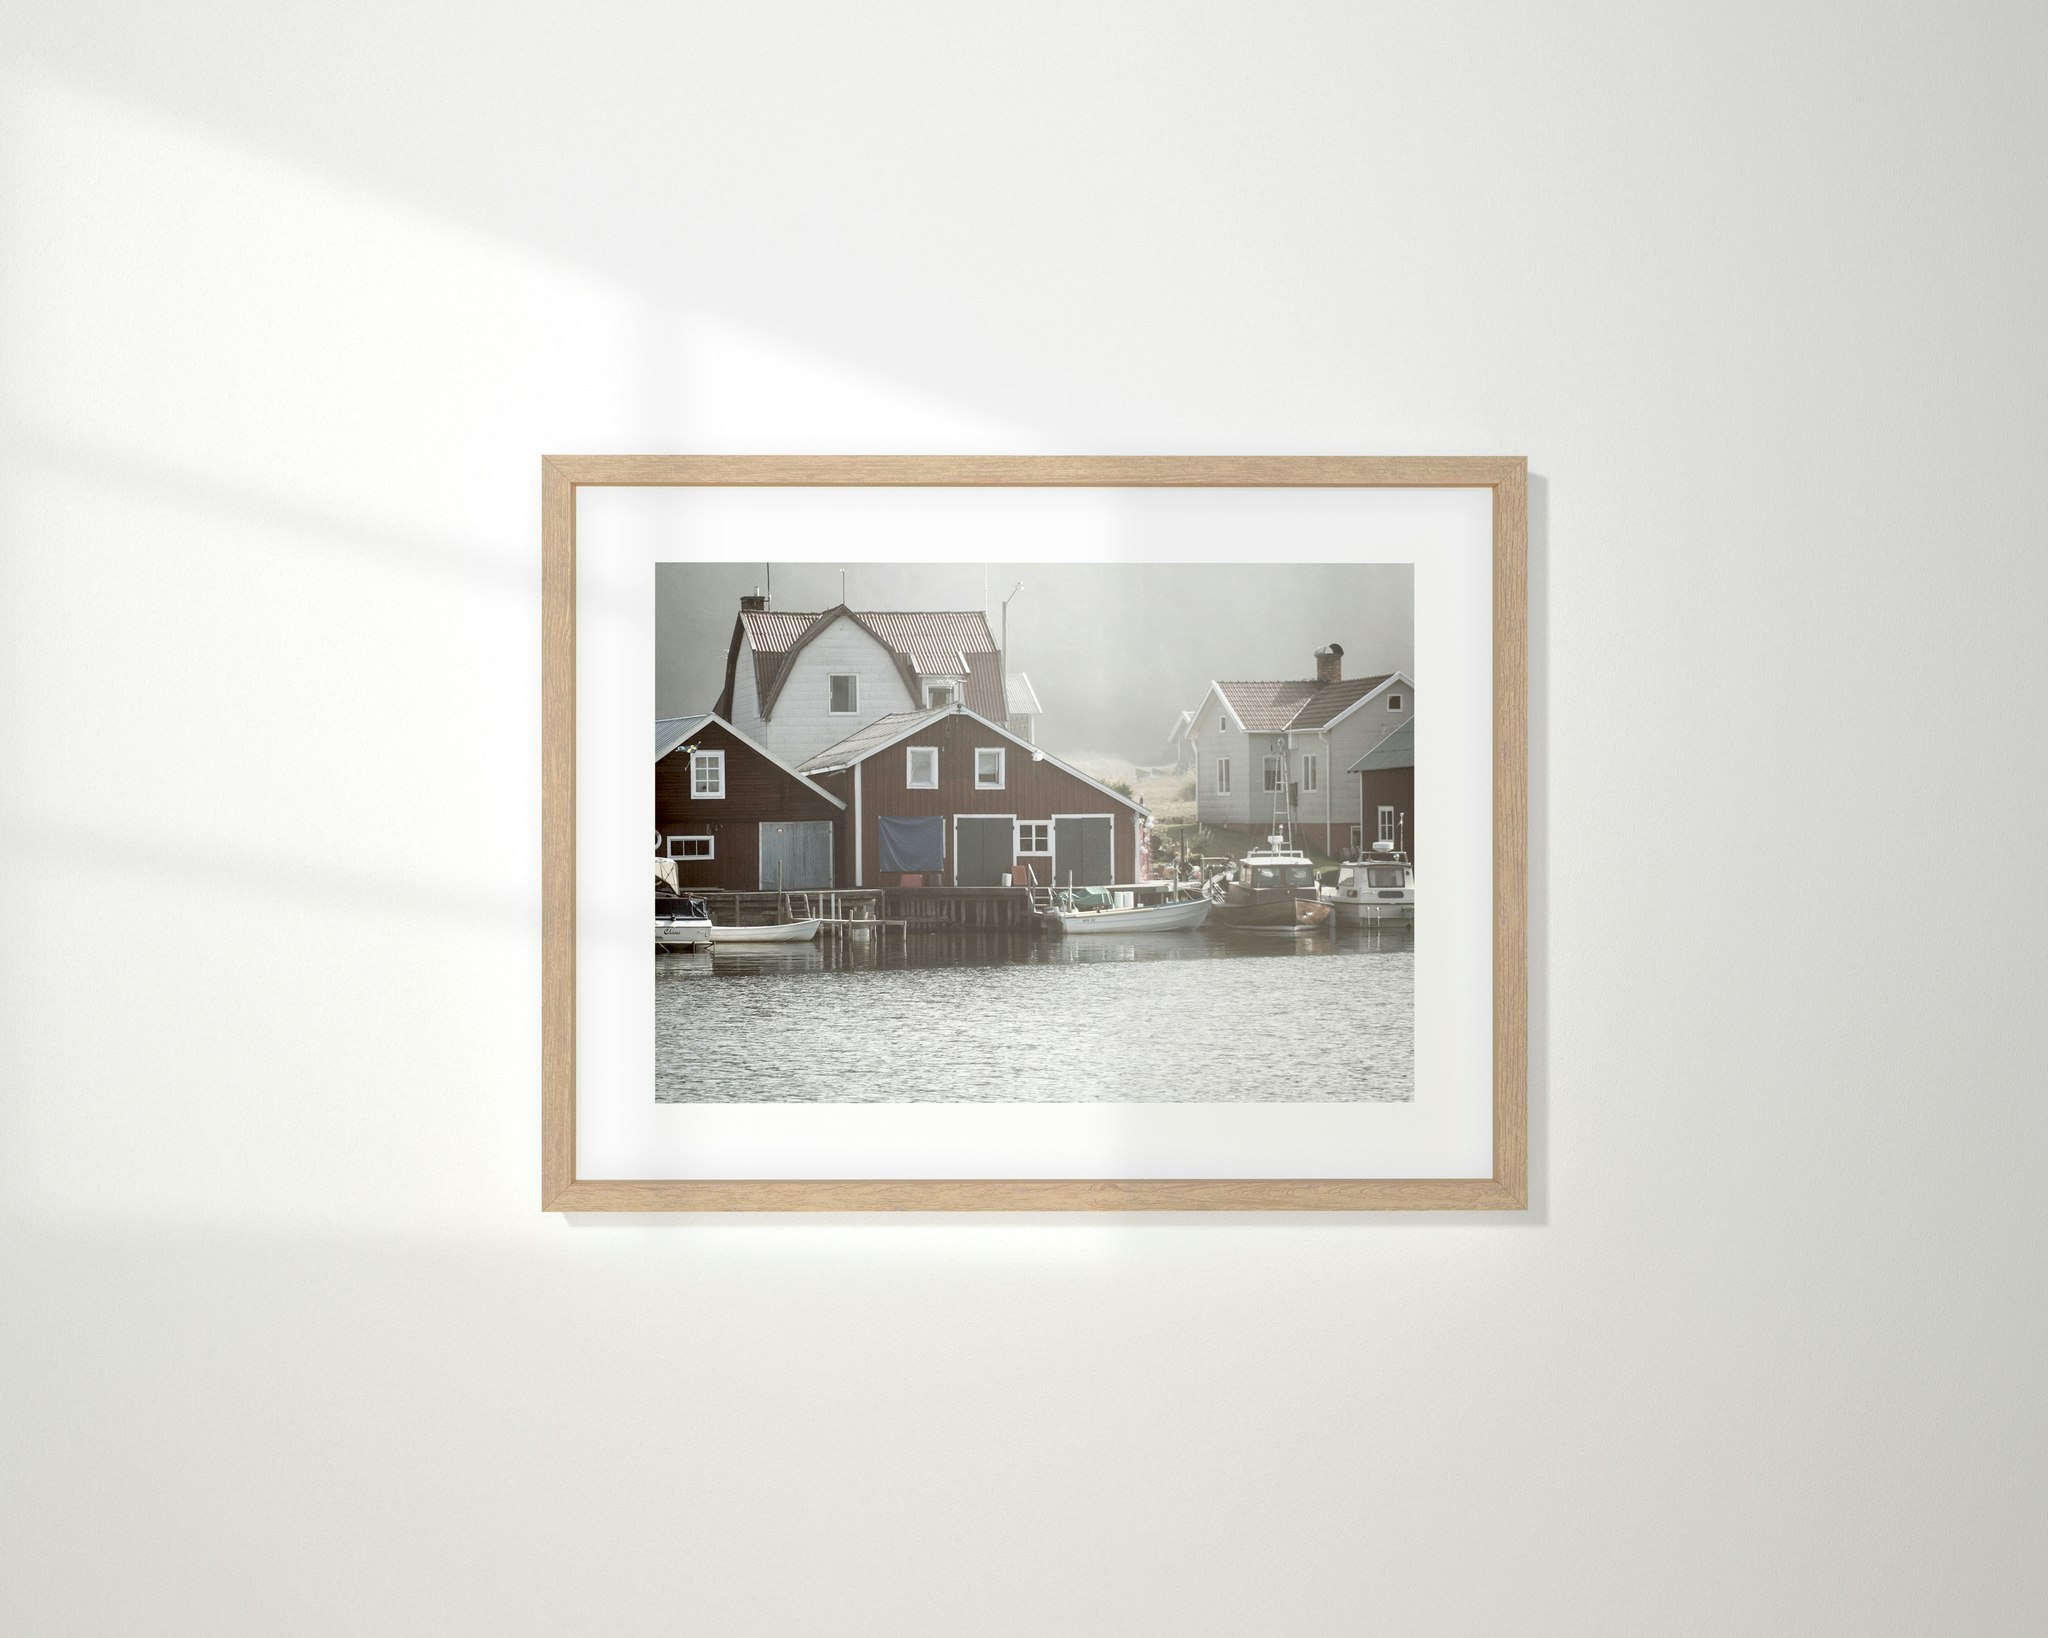 At The Fishermans Place - Foto print